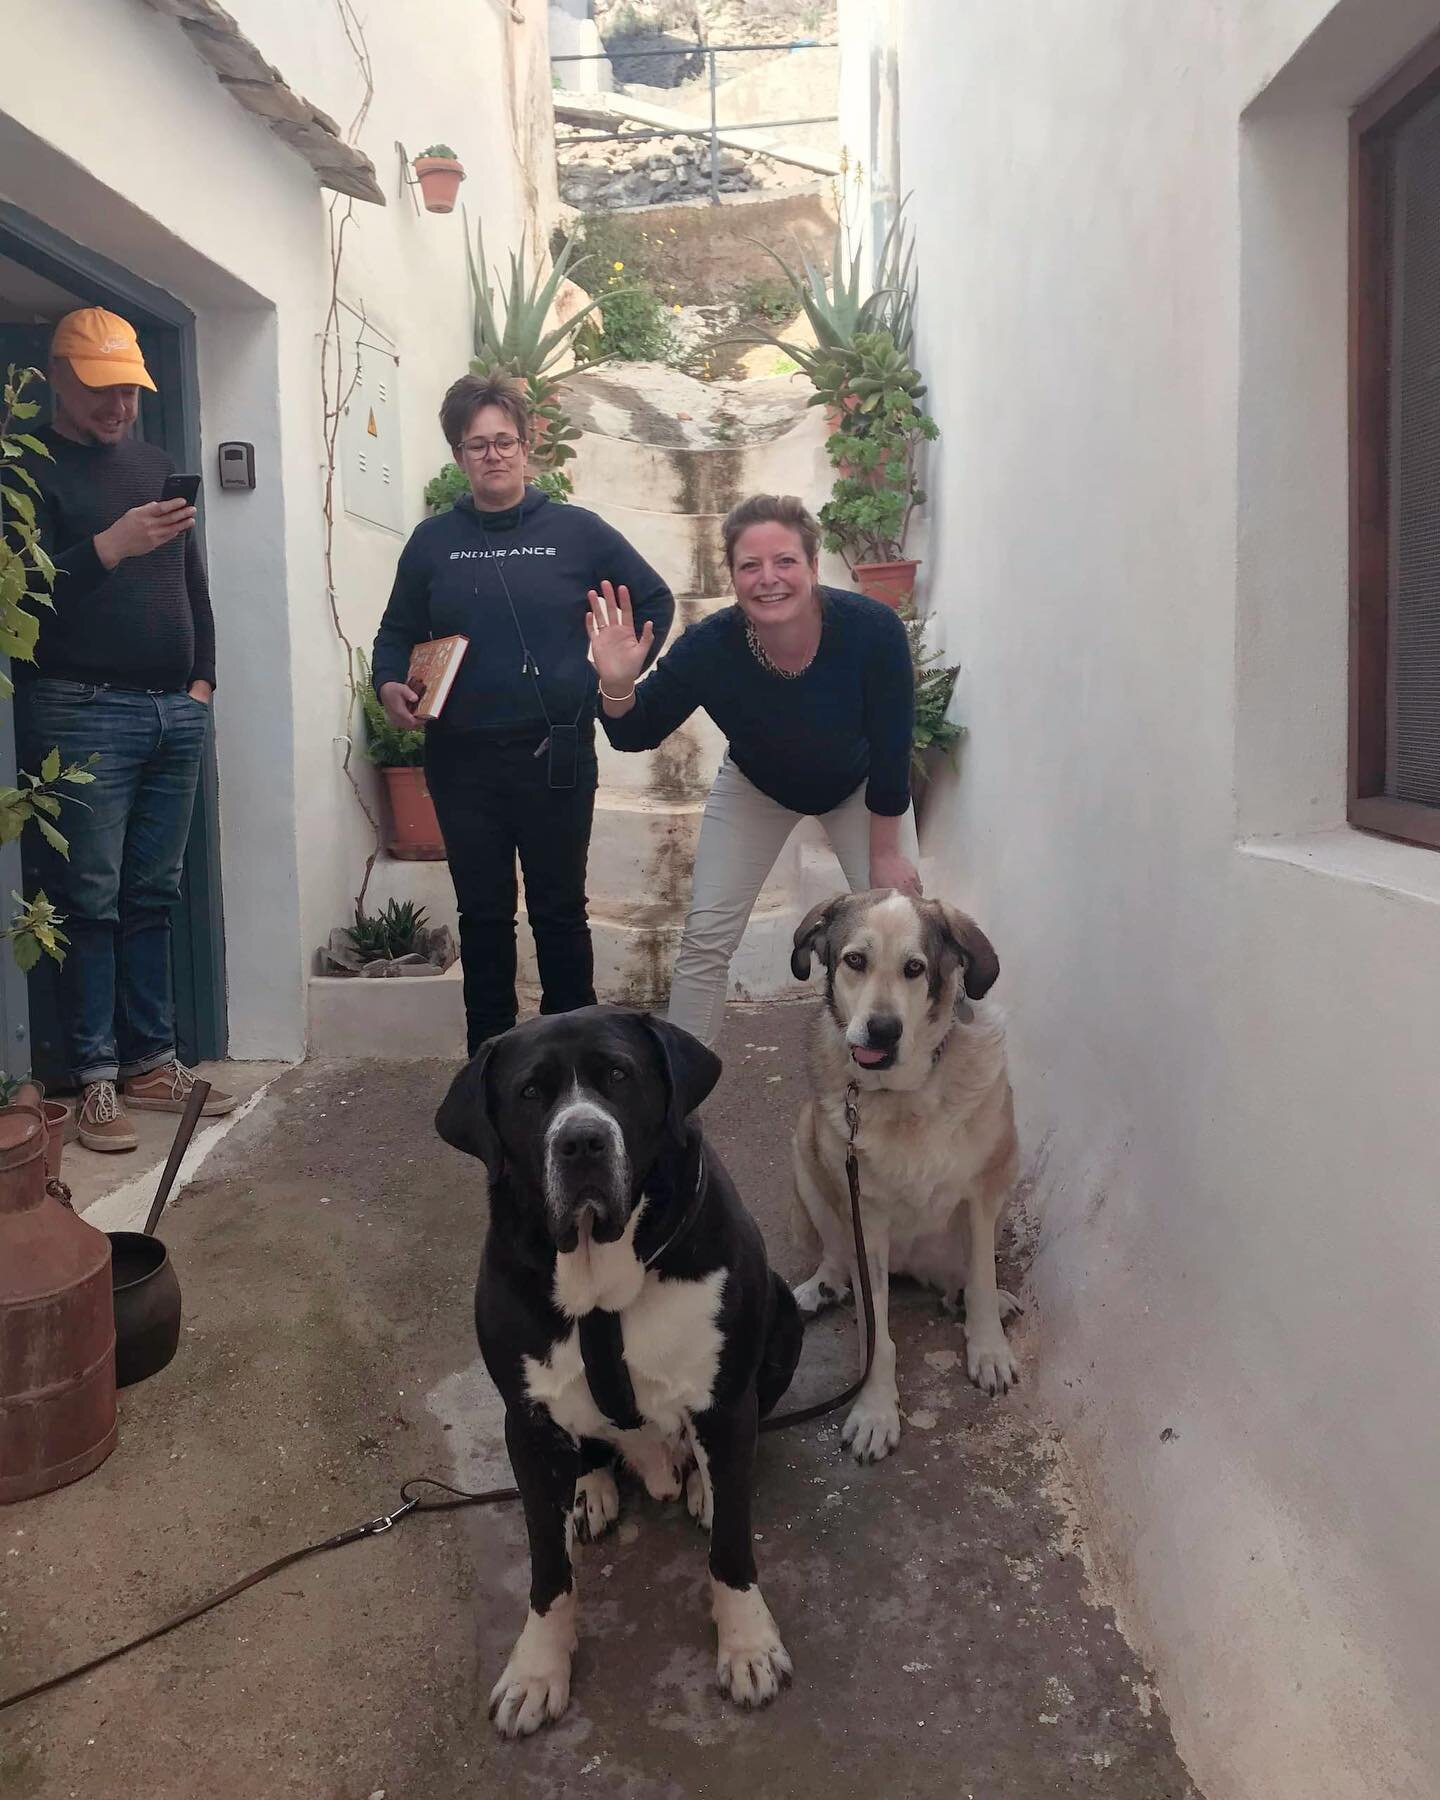 Every Hello is a Goodbye waiting to happen.
Making new friends with every visit in Polopos, even Leia made a friend. Ozzie the 70kgs of pure mastin sweetness.
❤️🐕
Elke Hallo is een afscheid dat staat te gebeuren.
Elke bezoeker aan onze bnb in Polopo